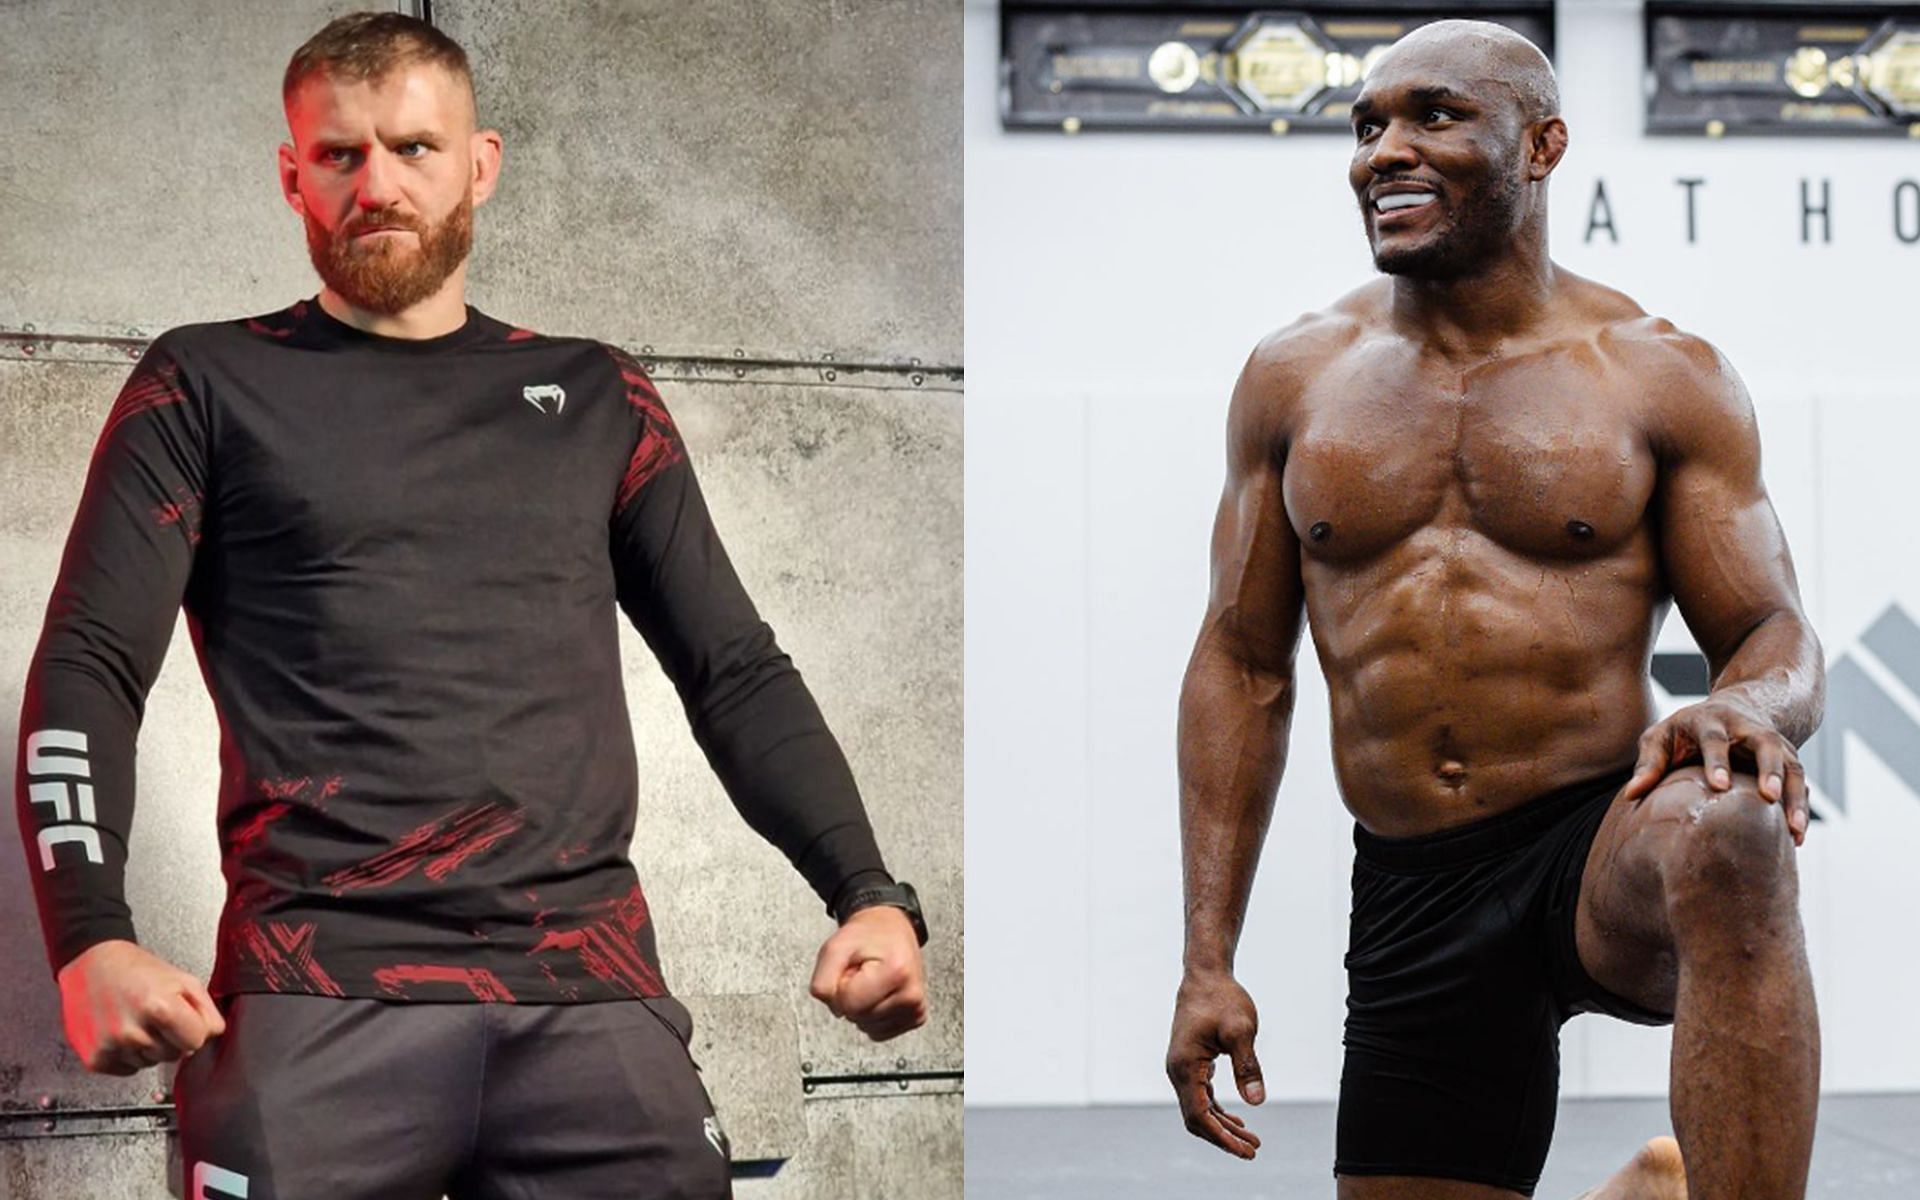 Kamaru Usman (right) believes that he could have defeated Jan Blachowicz (left) [Images Courtesy: @janblachowicz and @usman84kg Instagram]